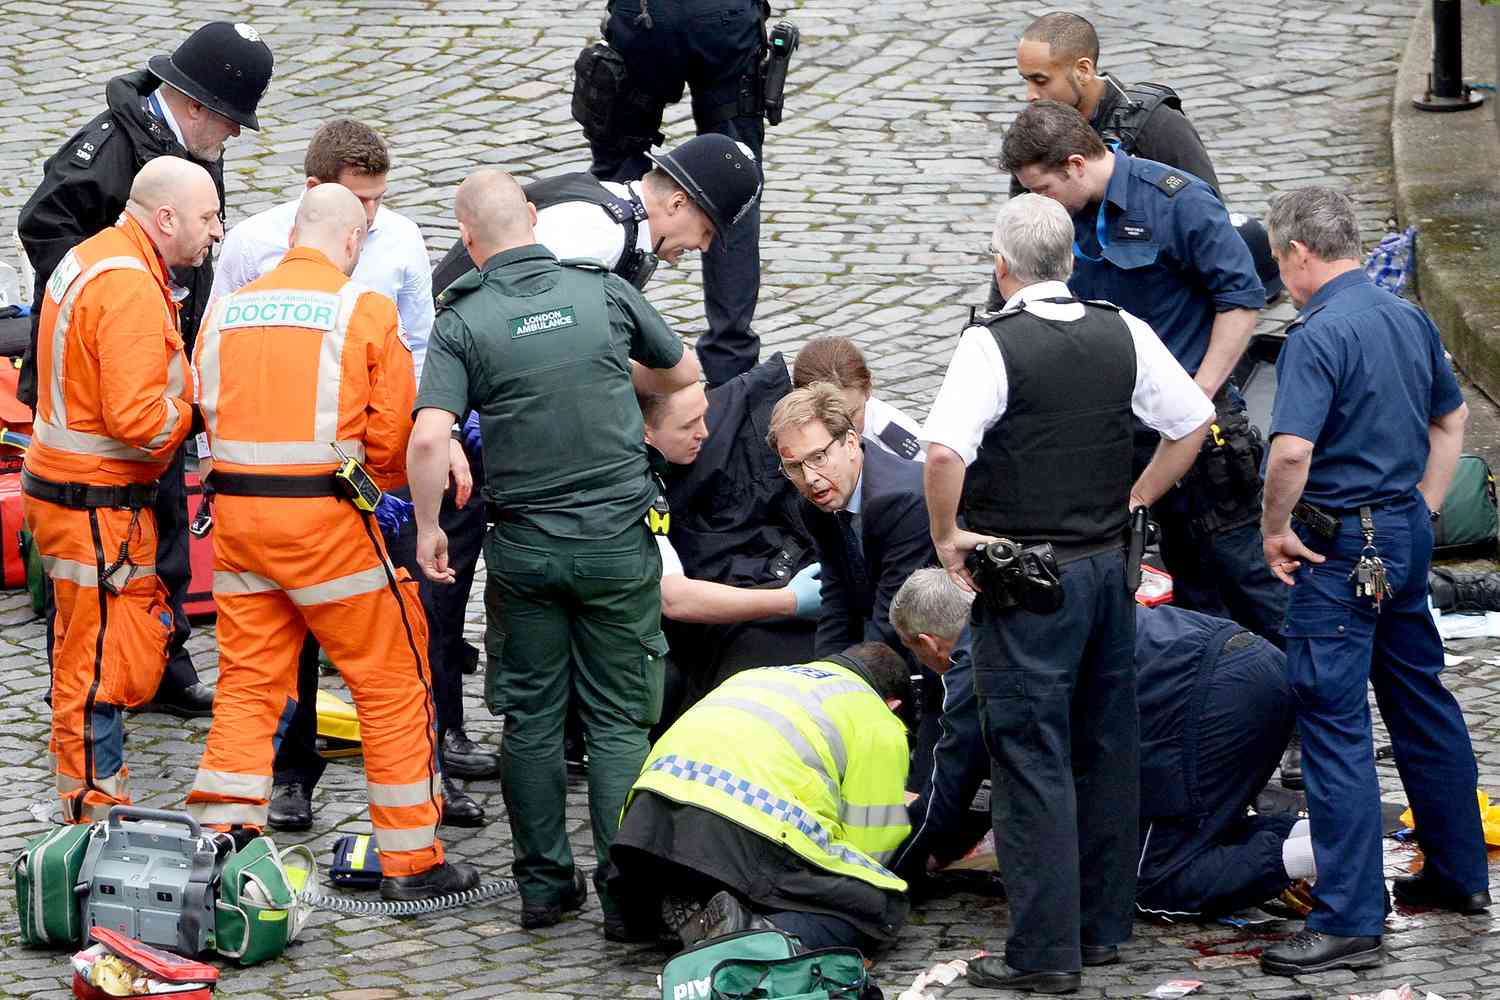 Palace of Westminster incident